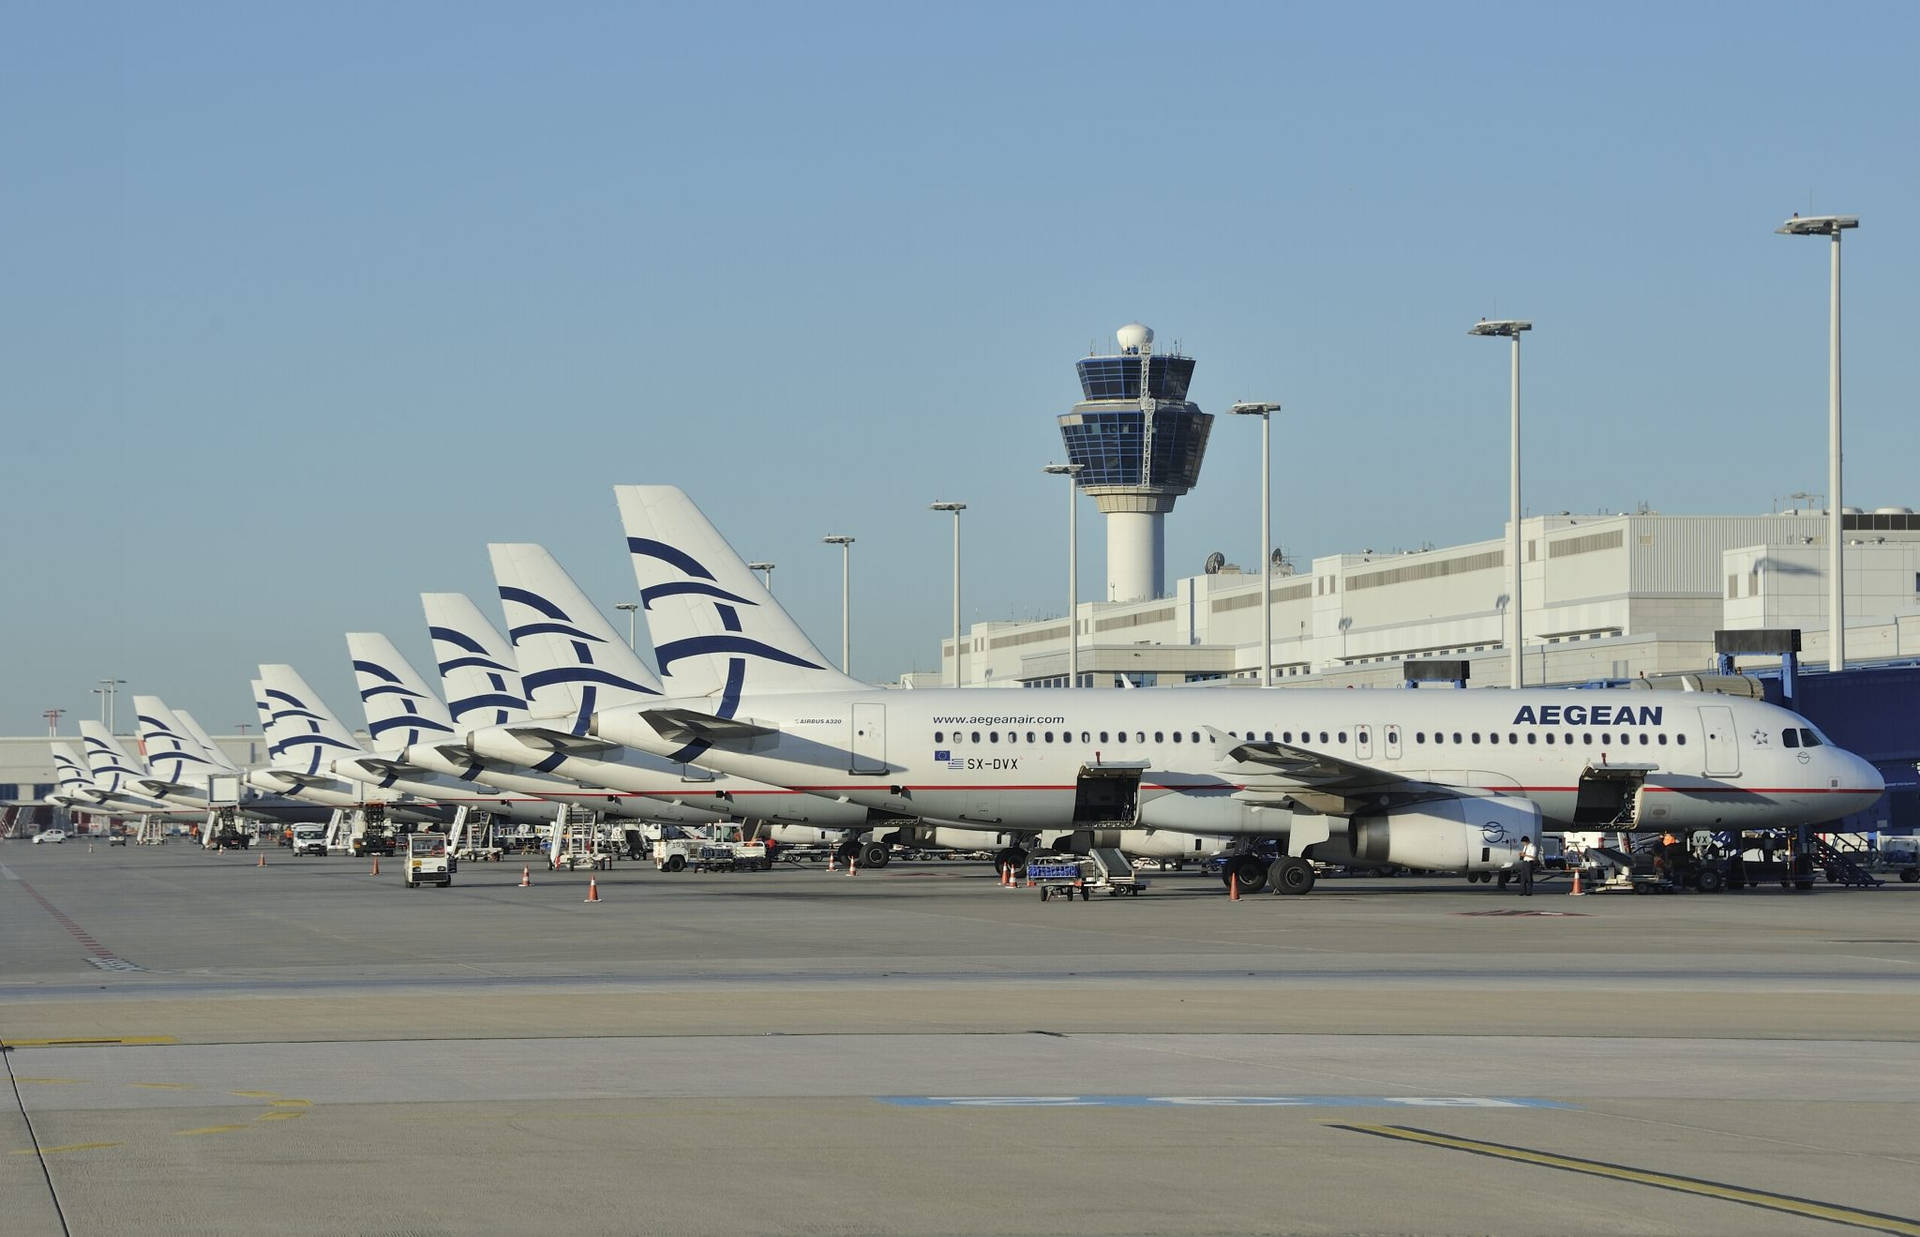 Linet op Aegean Airlines Airbus A320 fly Wallpaper